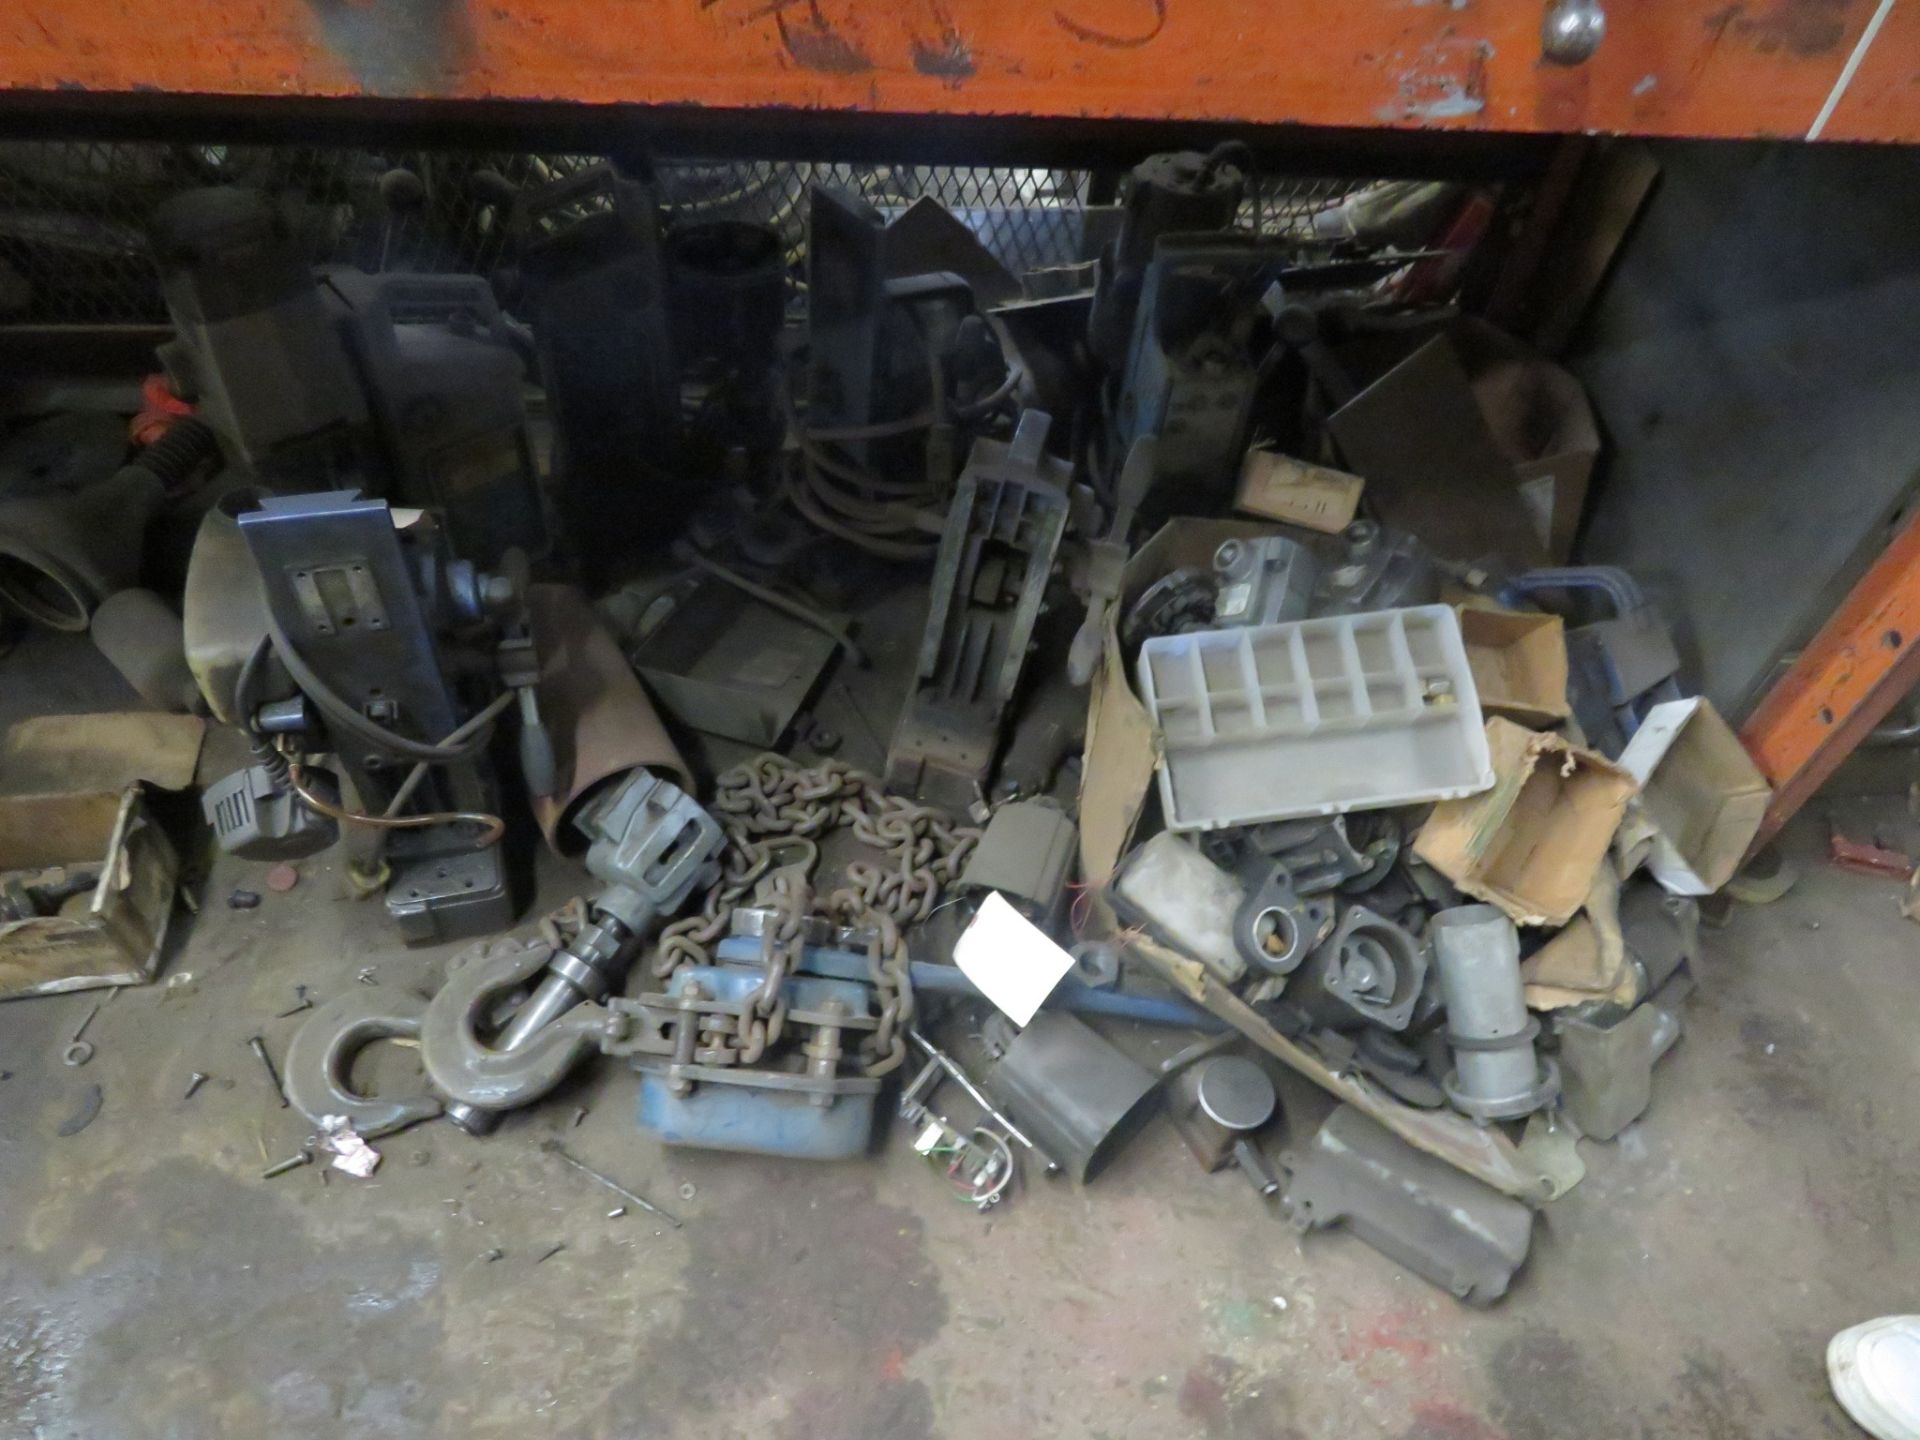 {LOT} Large Qty In Back Cage c/o: Fixtures, Tools, Compressors, Etc. - Image 2 of 14